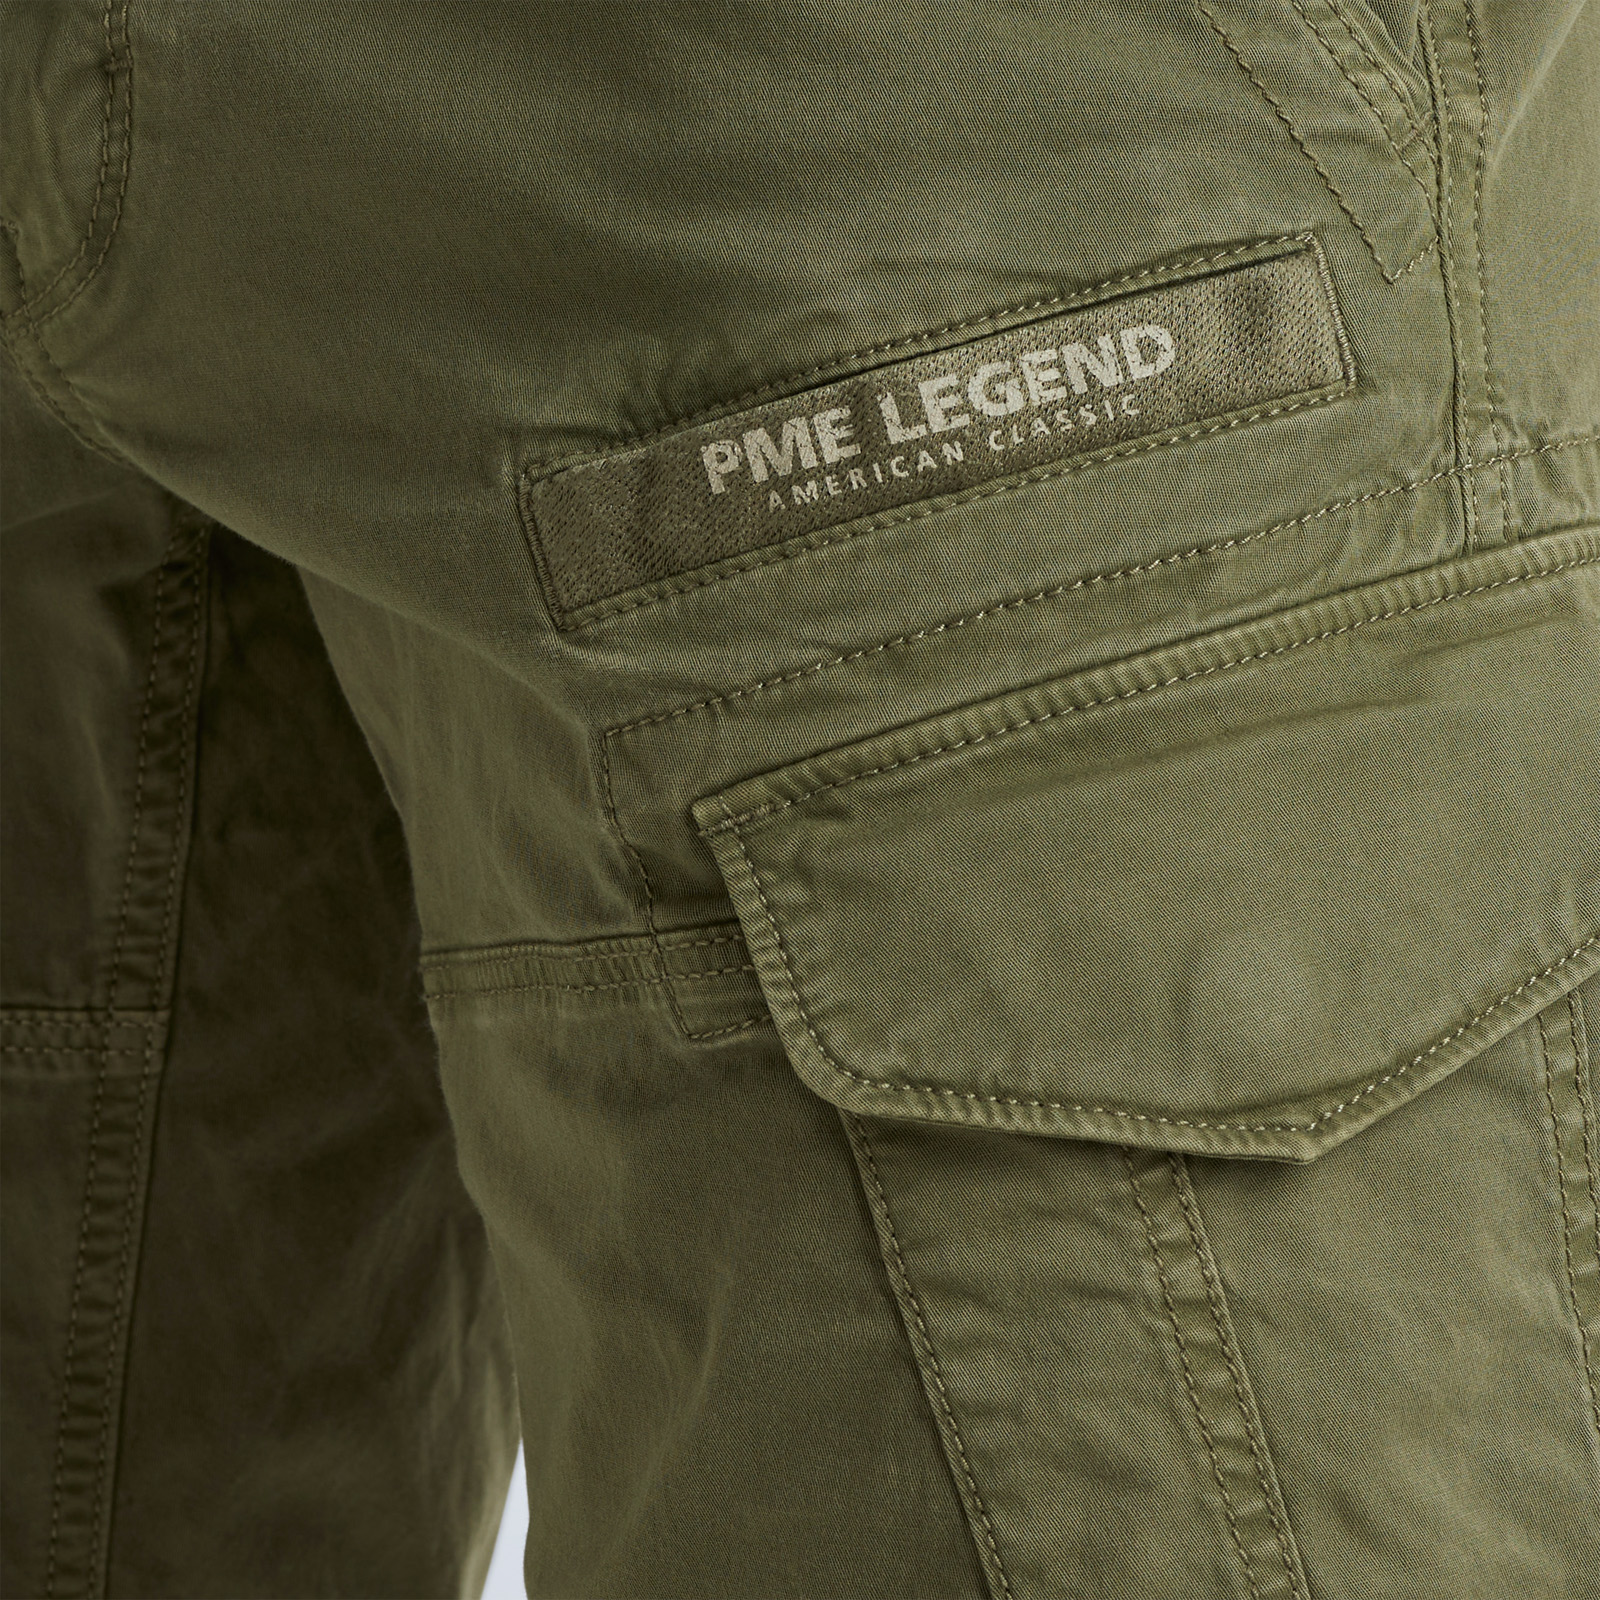 PME LEGEND | Nordrop Cargo returns Free | and Short shipping